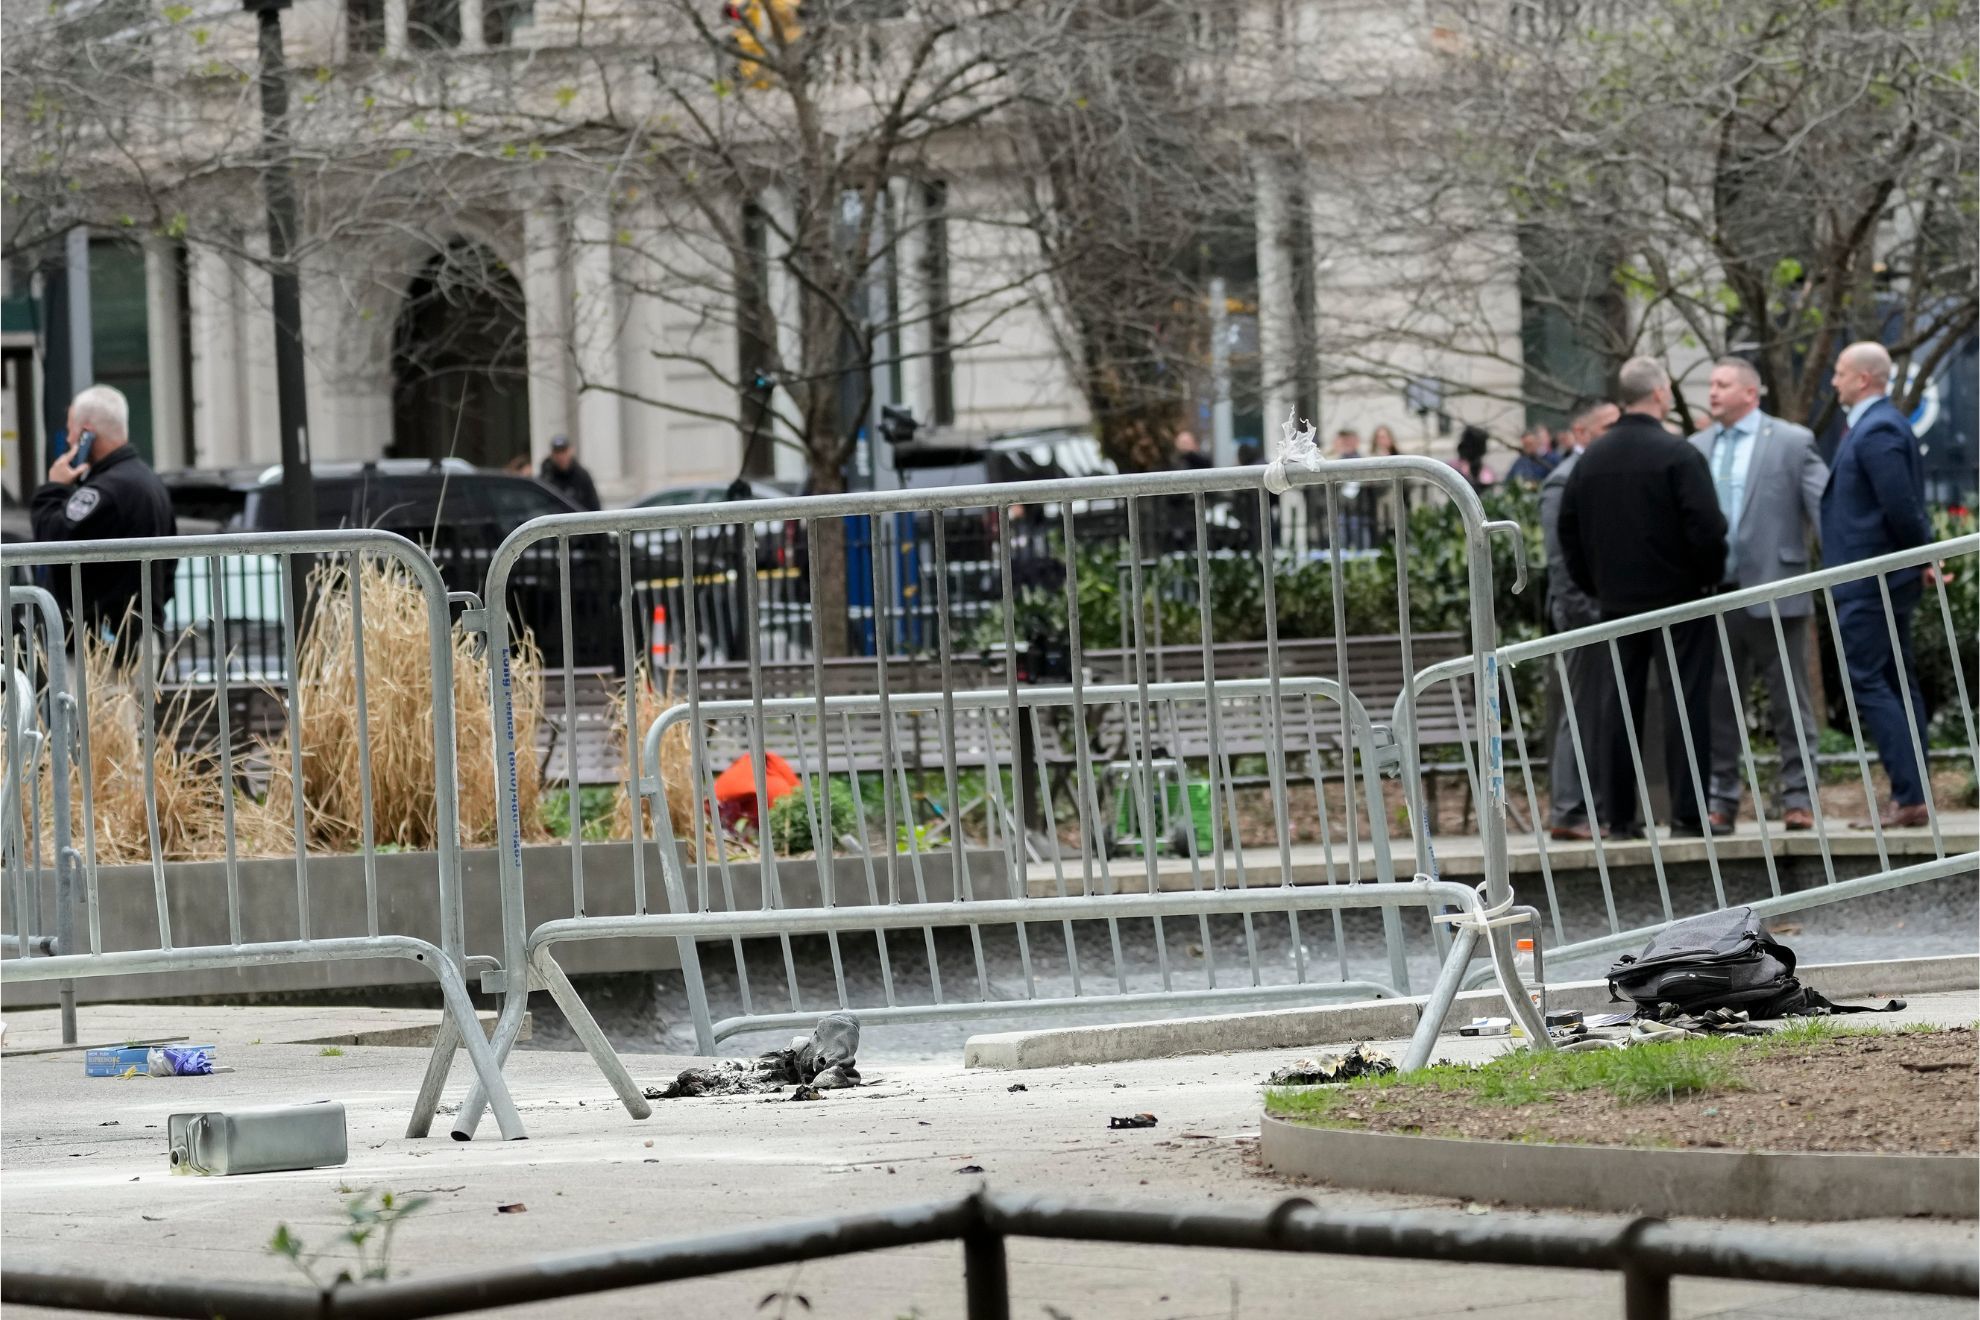 Man self-immolates near of Manhattan Courthouse where Donald Trump is on trial